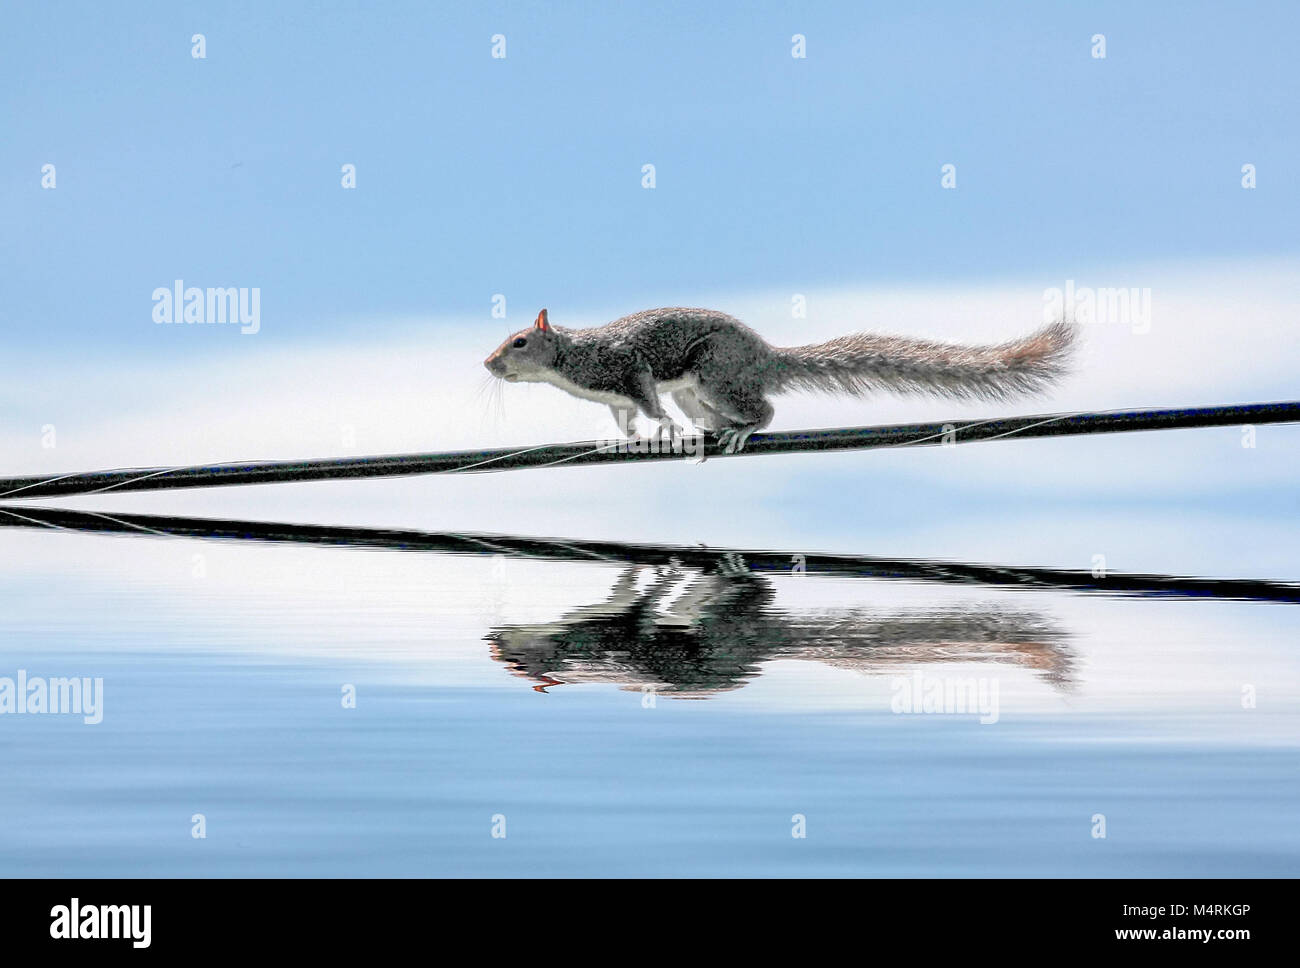 An Eastern gray squirrel or grey squirrel, tree squirrel, Sciurus carolinensis, running along a telephone wire. Stock Photo